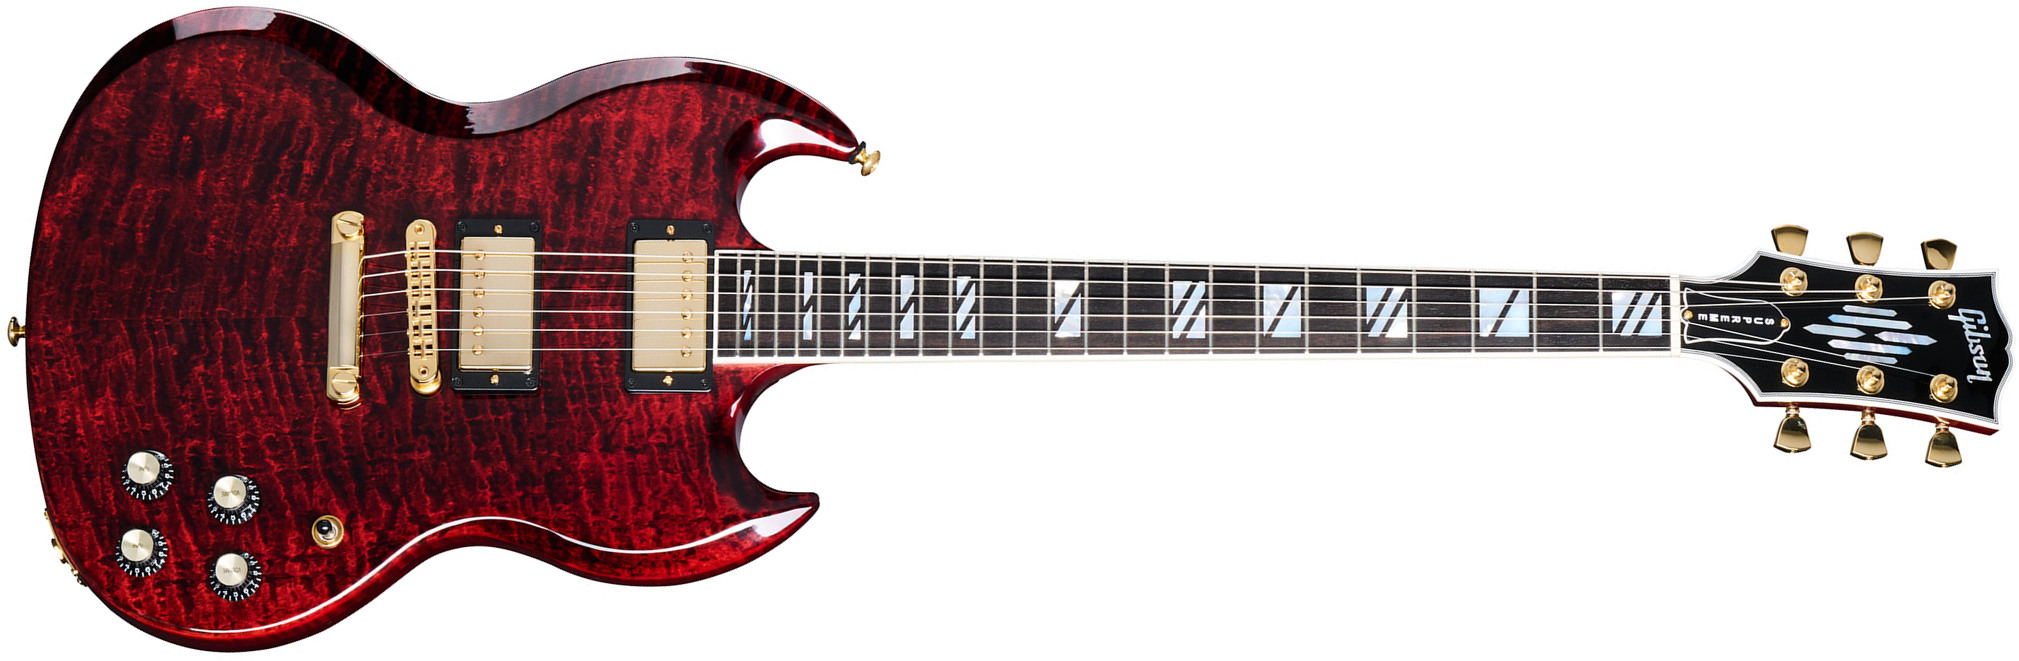 Gibson Sg Supreme Usa 2h Ht Rw - Wine Red - Double cut electric guitar - Main picture